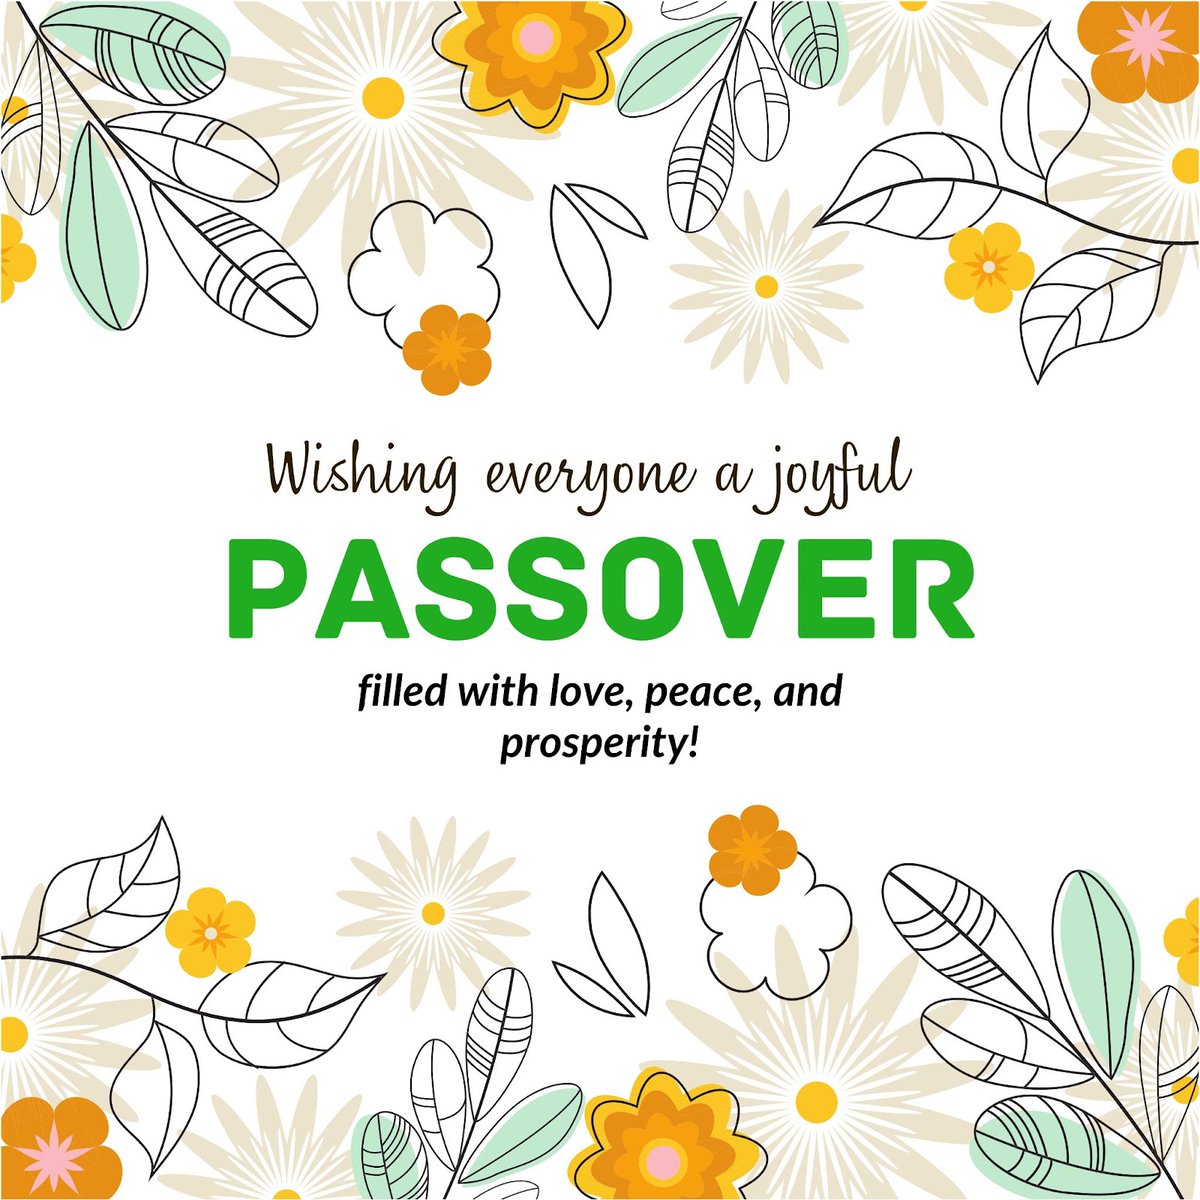 Happy Passover to all those celebrating!
May this special time bring families and communities together in celebration of
freedom and renewal. Chag Sameach! 🕊️🌟
-----
Learn more at canbh.org
.
#Passover #ChagSameach #SameachPesach #HappyPassover